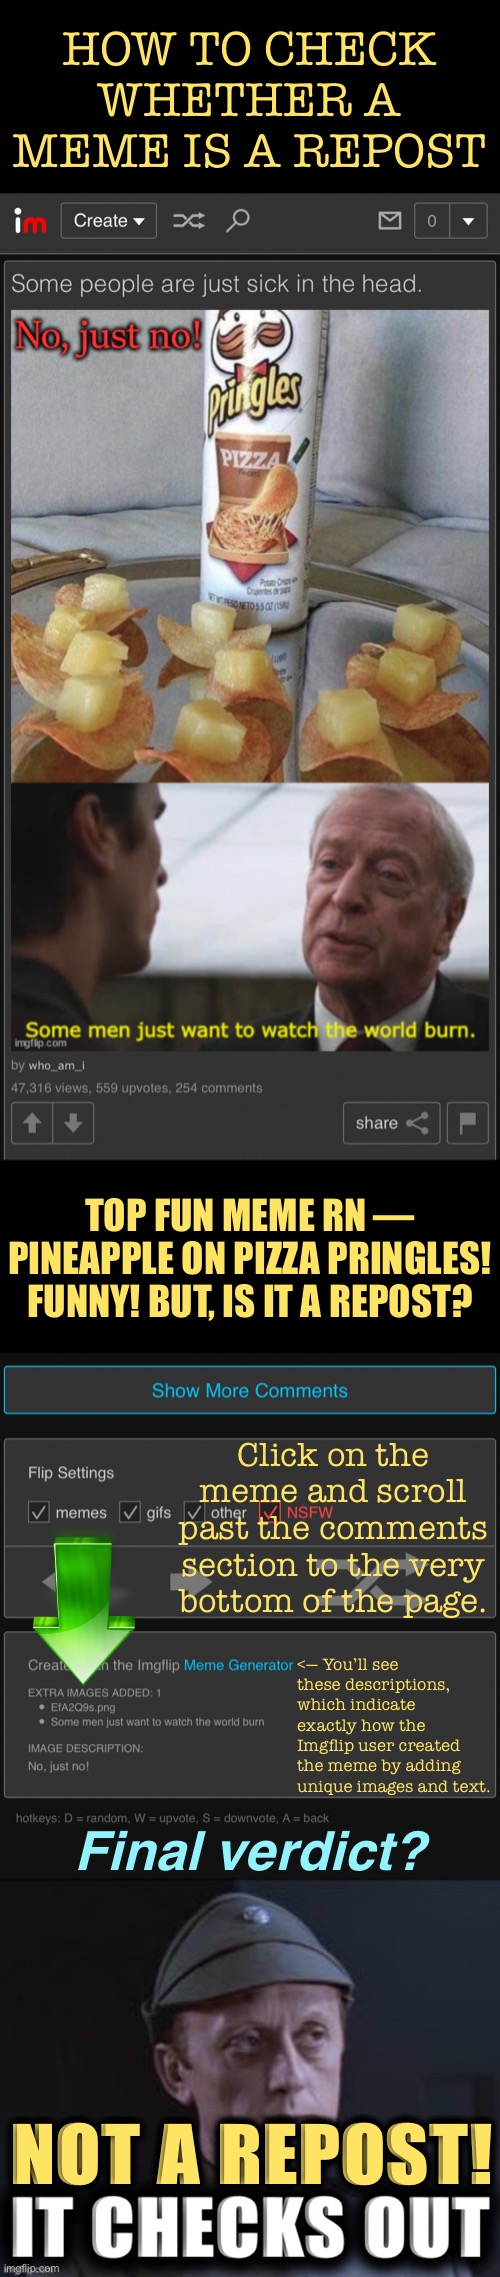 Definitions of a “repost” vary, but this will tell you whether an Imgflipper added something unique or merely copy-pasted. | HOW TO CHECK WHETHER A MEME IS A REPOST; TOP FUN MEME RN — PINEAPPLE ON PIZZA PRINGLES! FUNNY! BUT, IS IT A REPOST? Click on the meme and scroll past the comments section to the very bottom of the page. <— You’ll see these descriptions, which indicate exactly how the Imgflip user created the meme by adding unique images and text. Final verdict? NOT A REPOST! | image tagged in it checks out,reposts,memes about memes,memes about memeing,reposts are lame,reposts are awesome | made w/ Imgflip meme maker